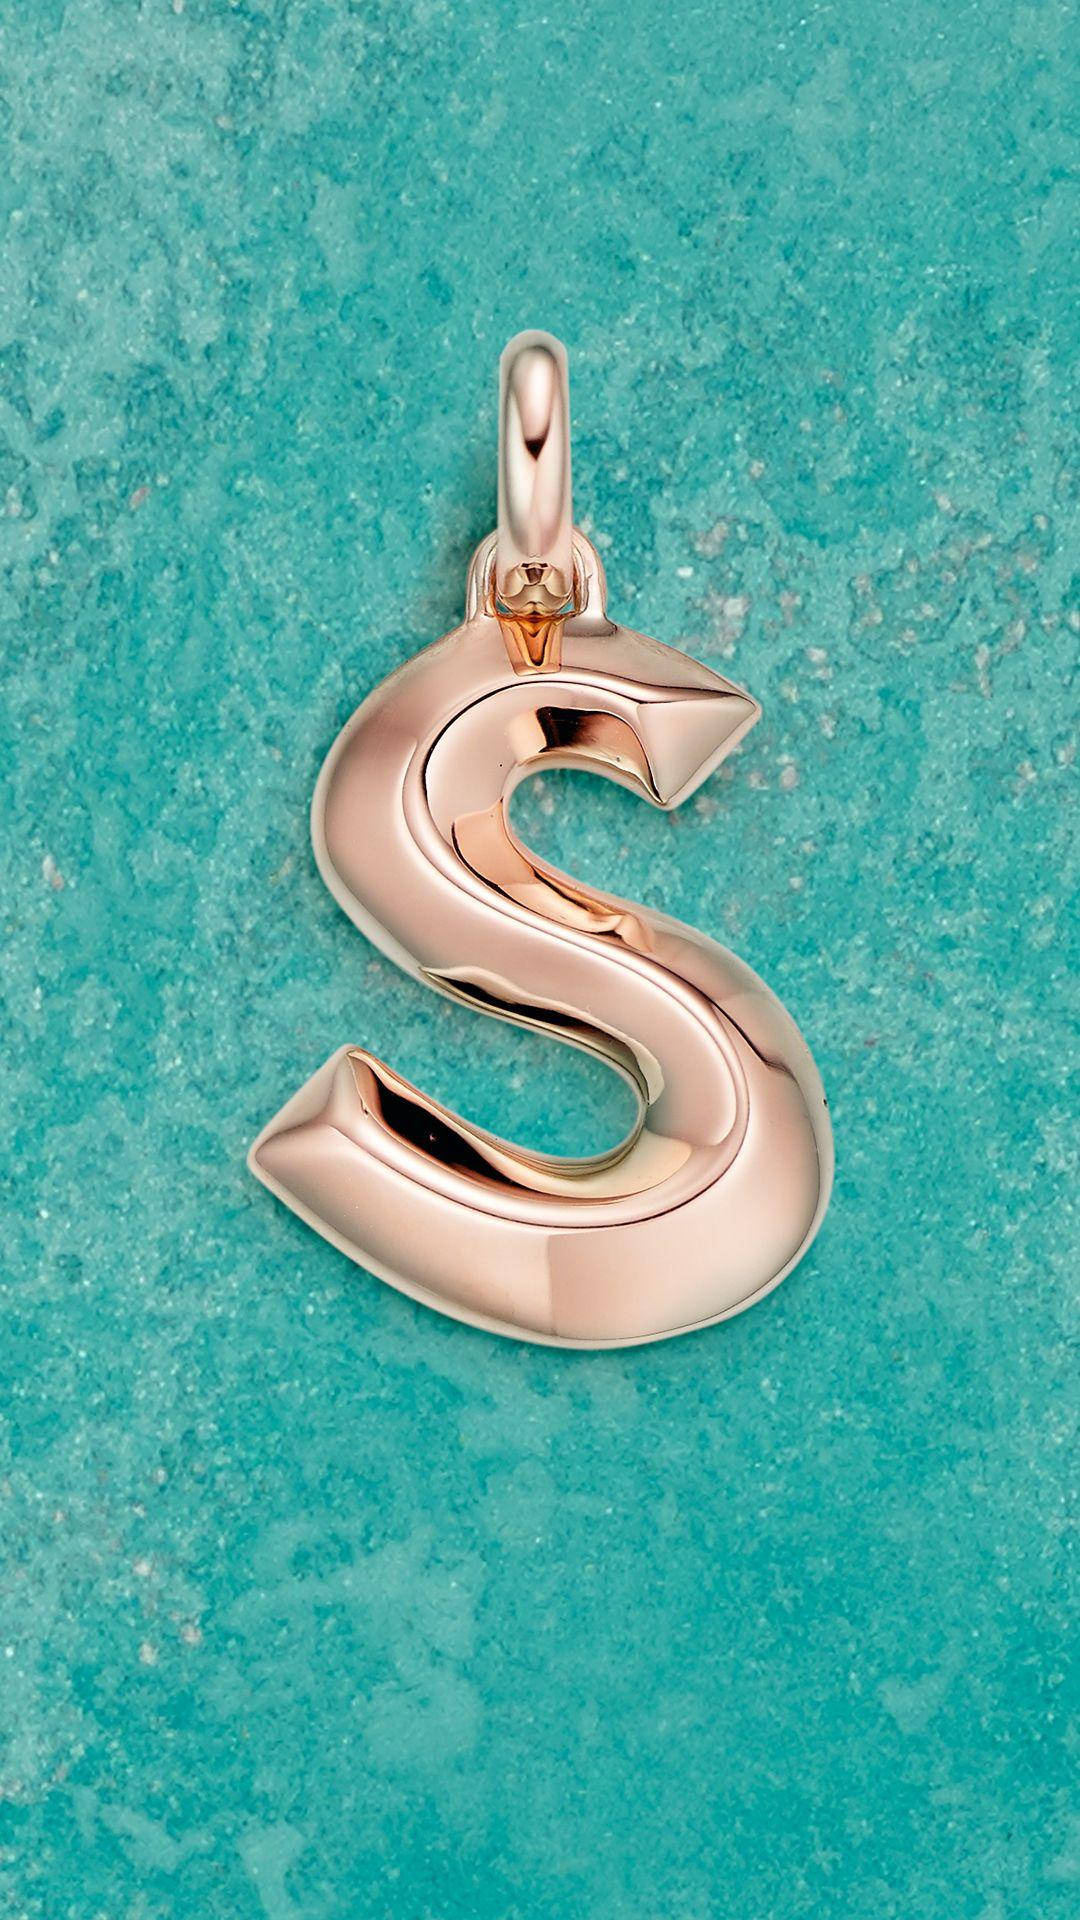 Letter S pendant, Unique design, HD wallpapers, Free download, 1080x1920 Full HD Phone